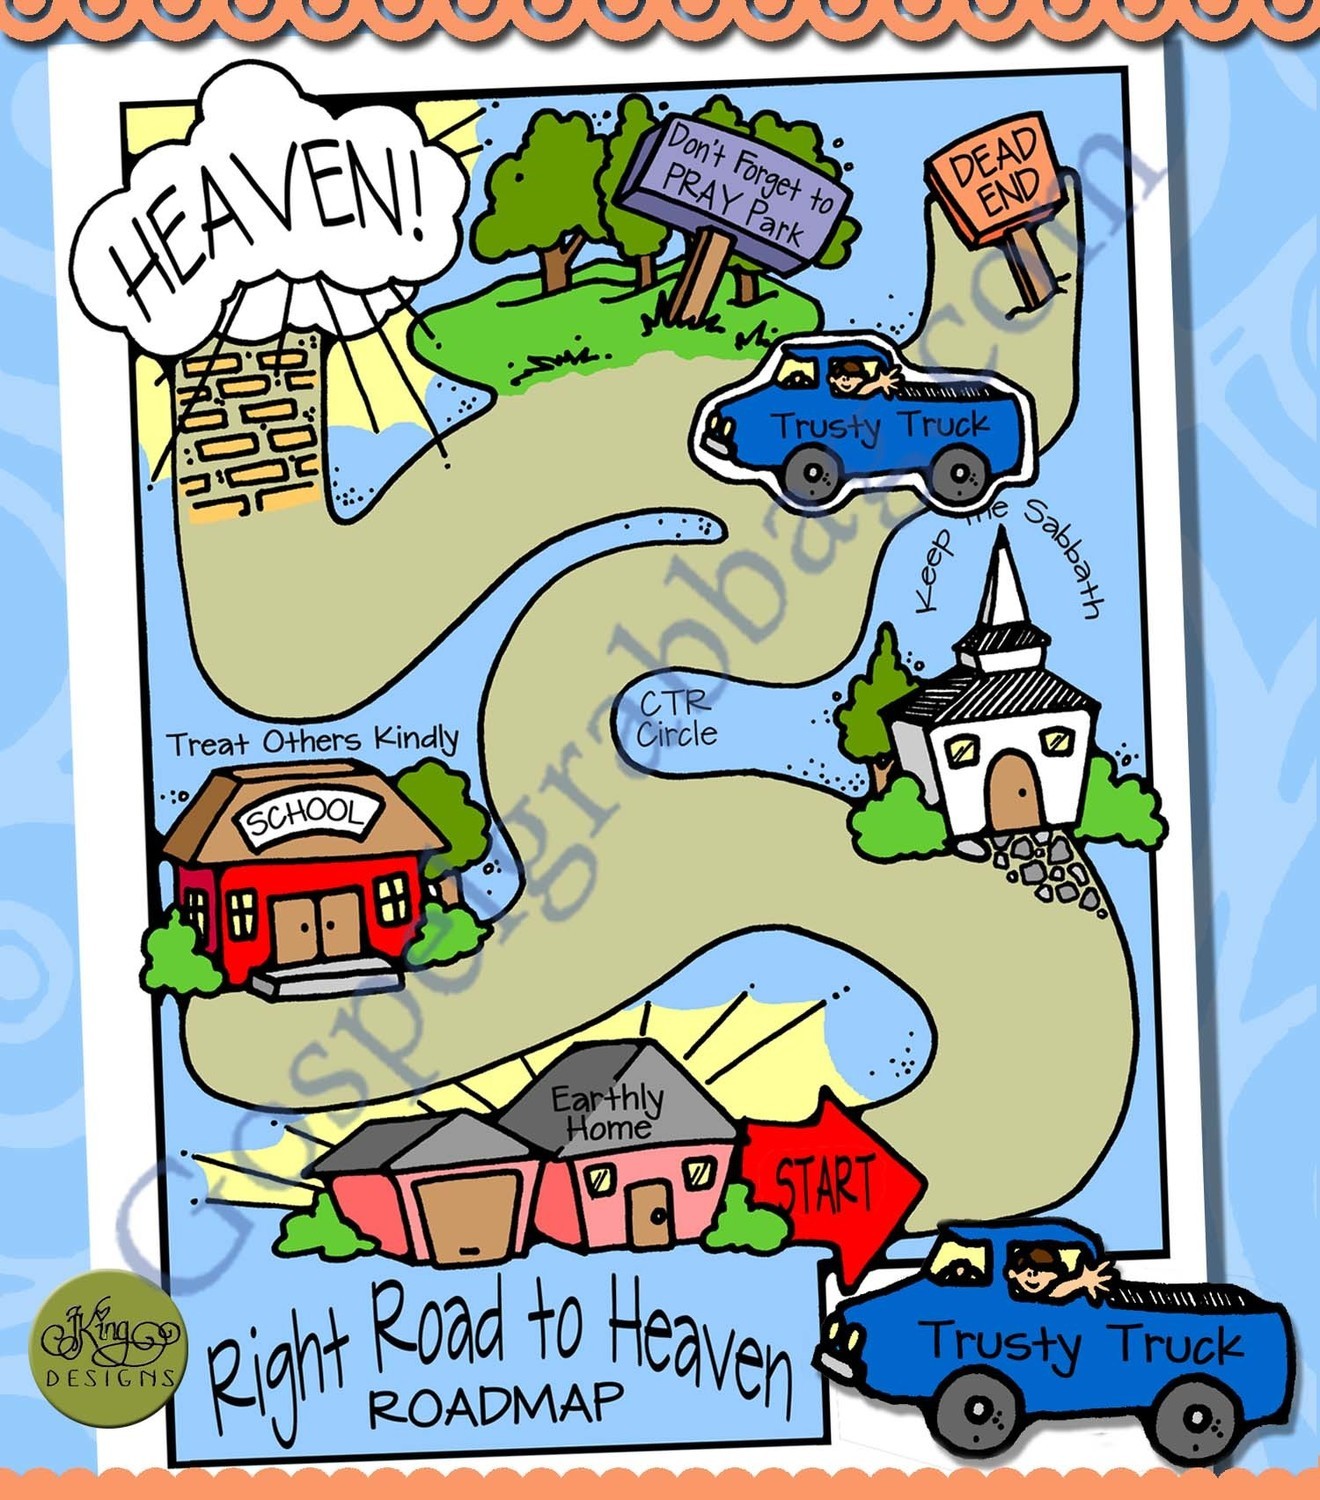 Right Road to Heaven - Map with Trusty Truck